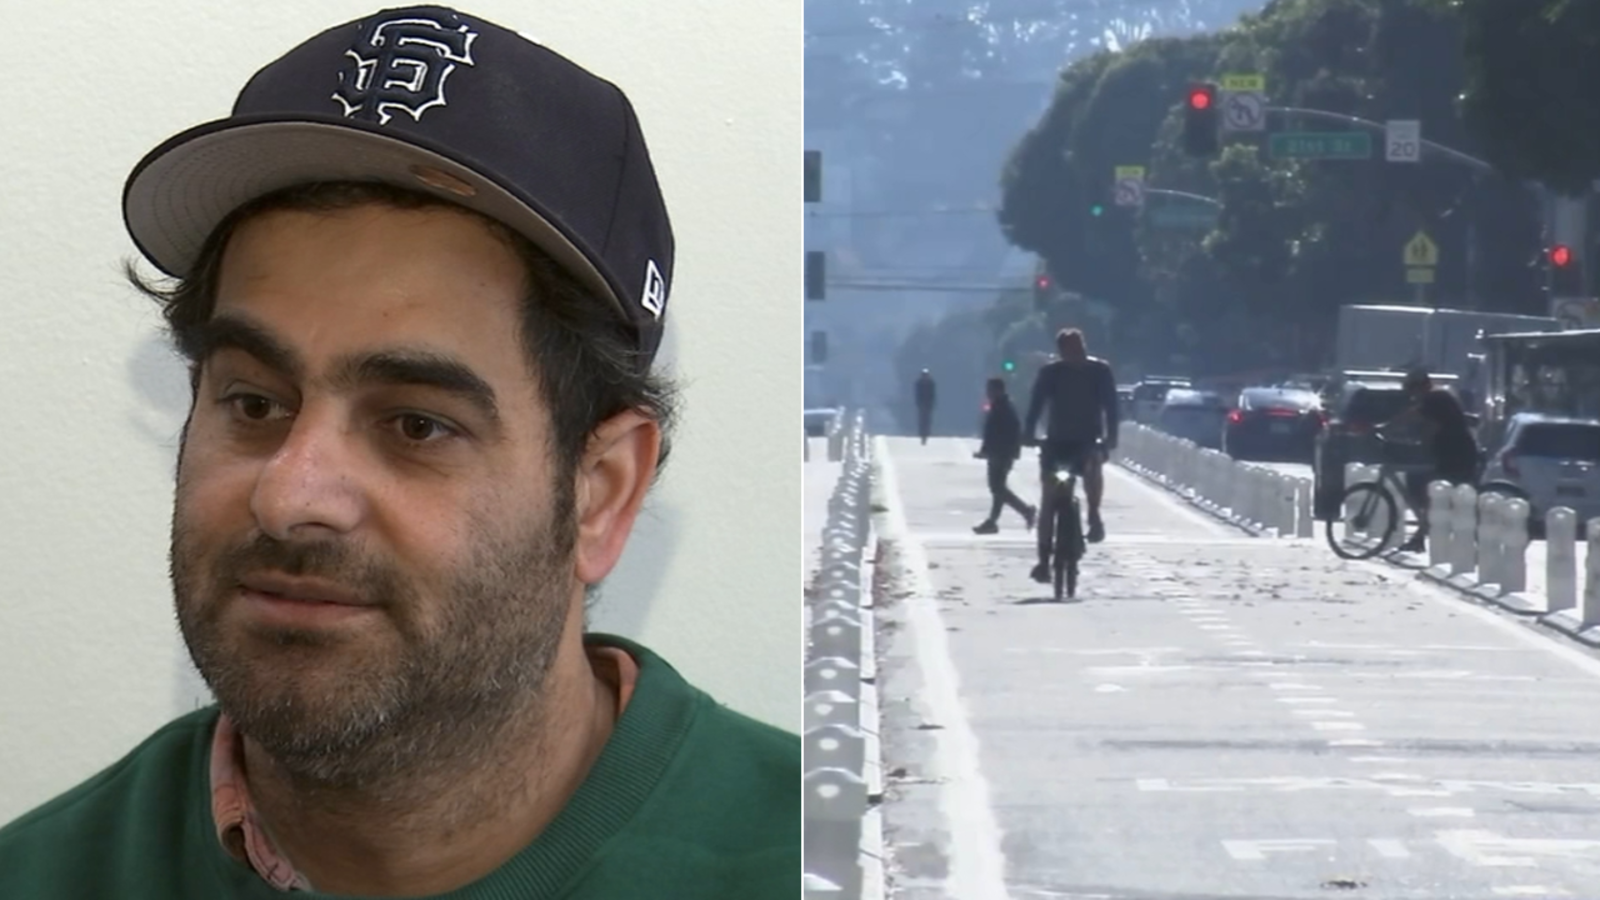 A business owner in San Francisco has initiated a hunger strike in protest of a new bike lane